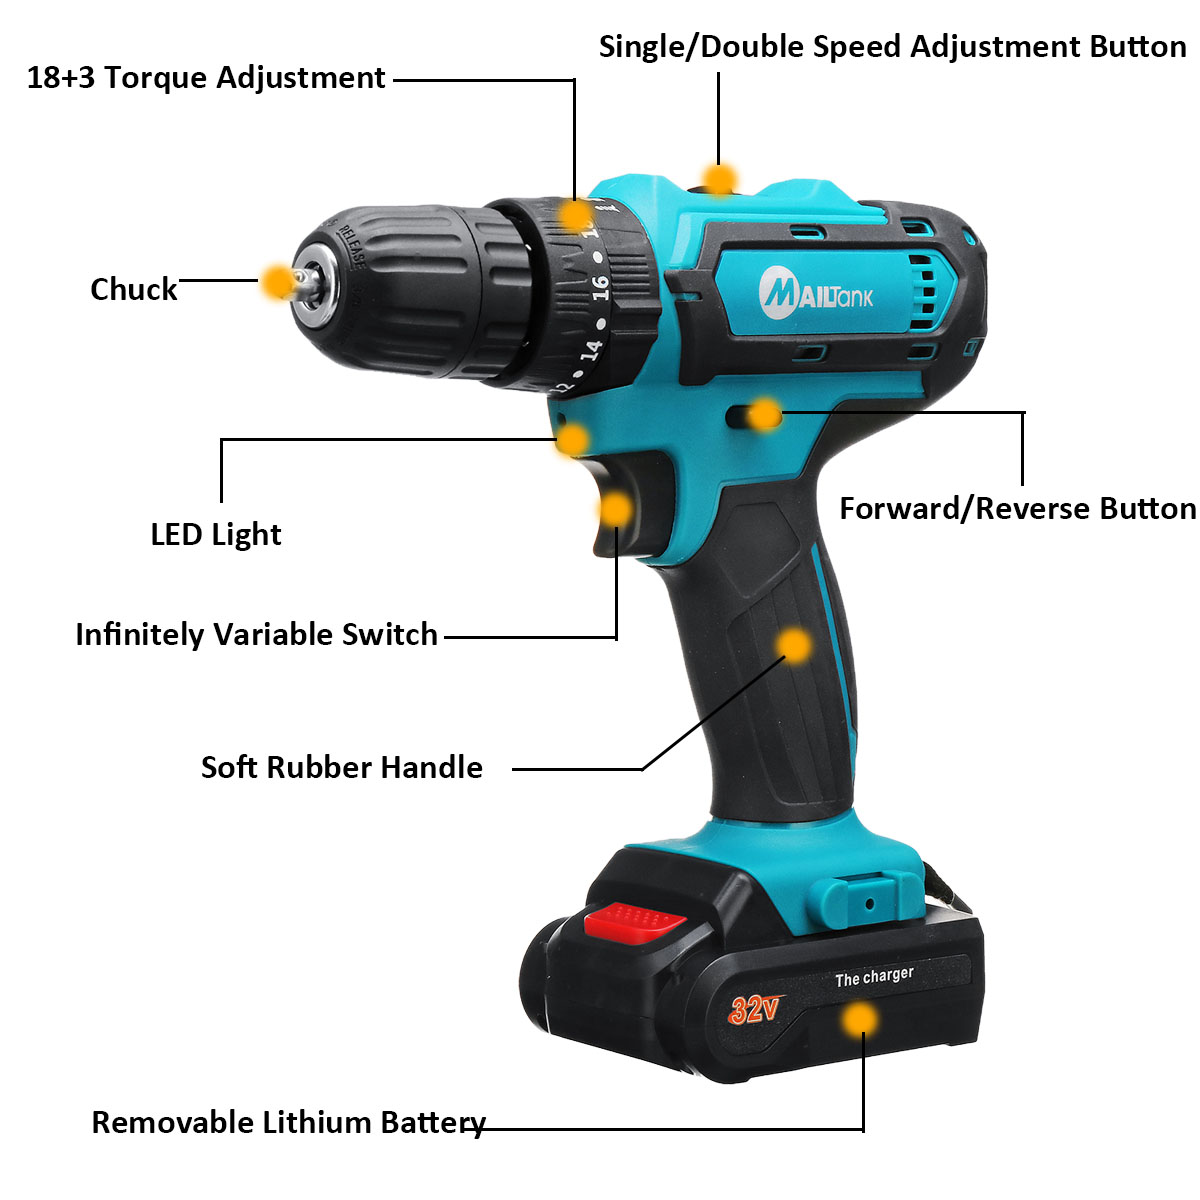 32V 2 Speed Power Drills 6000mah Cordless Drill 3 IN1 Electric Screwdriver Hammer Hand Drill 2 Batteries 18